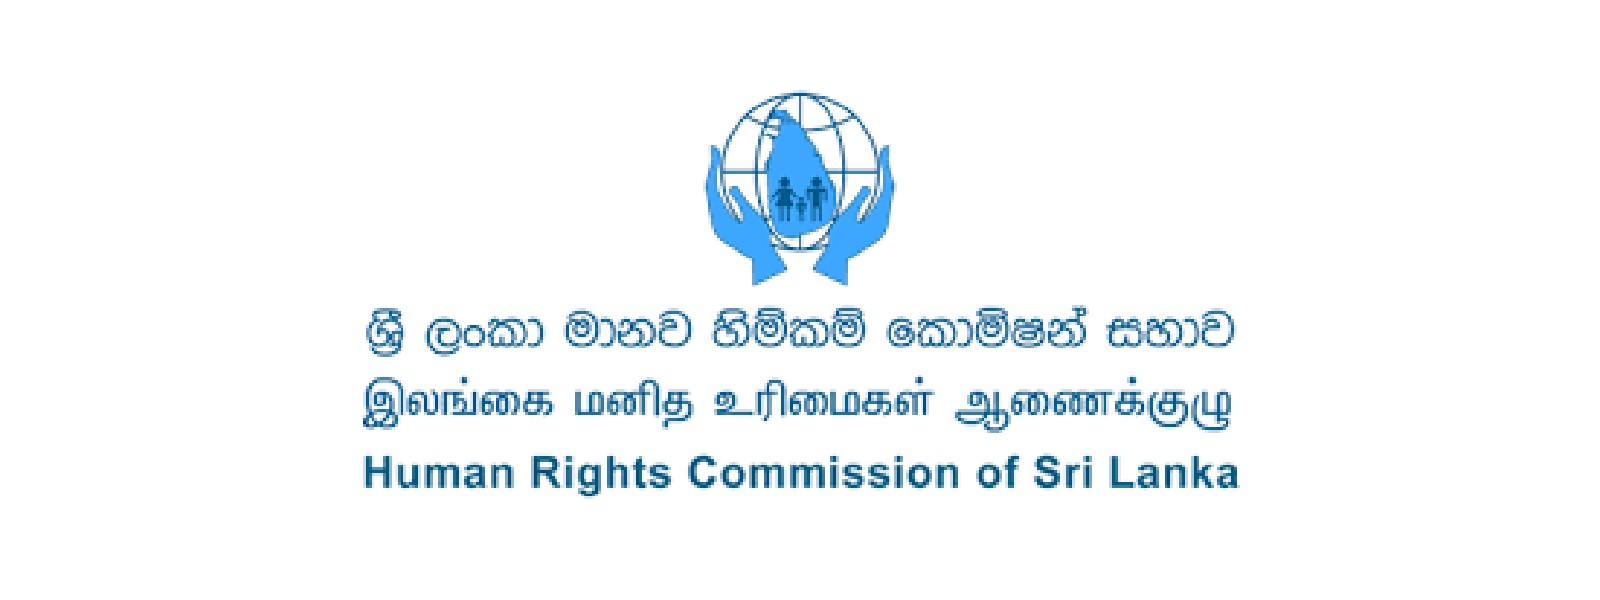 Human Rights Commission condemns violence on peaceful protests, and police inaction